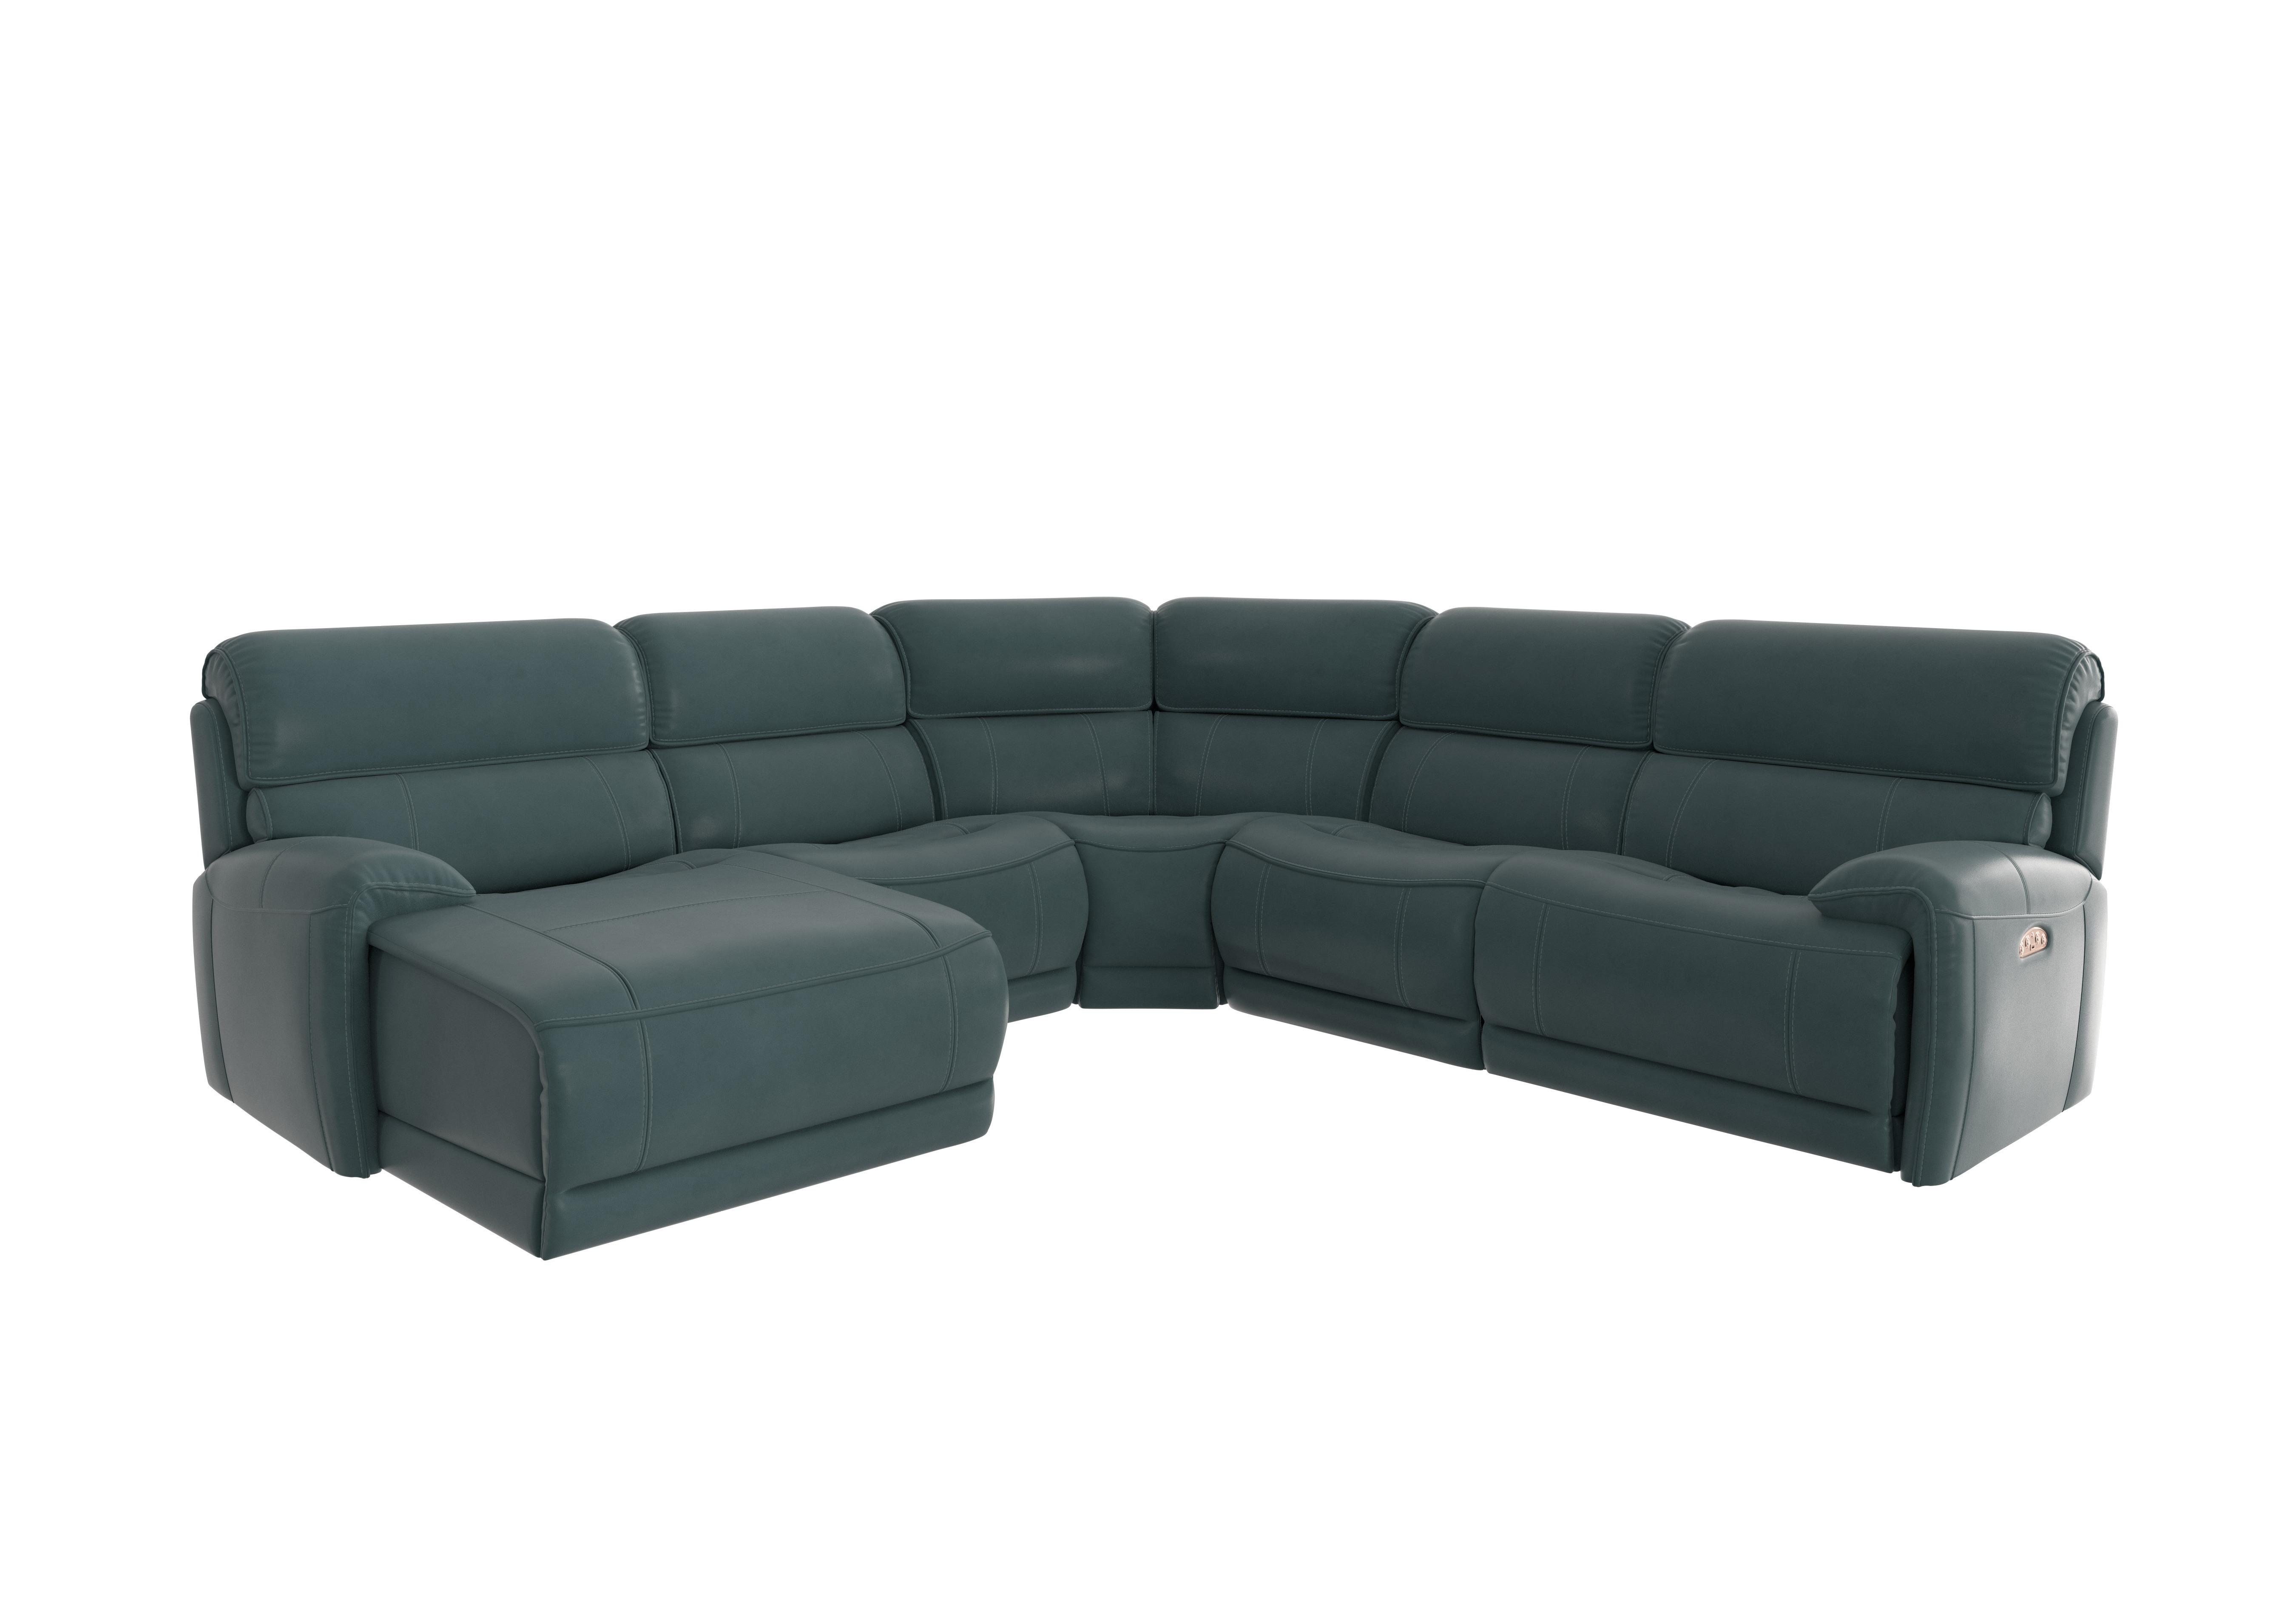 Link Leather Corner Chaise Power Sofa in Bv-301e Lake Green on Furniture Village